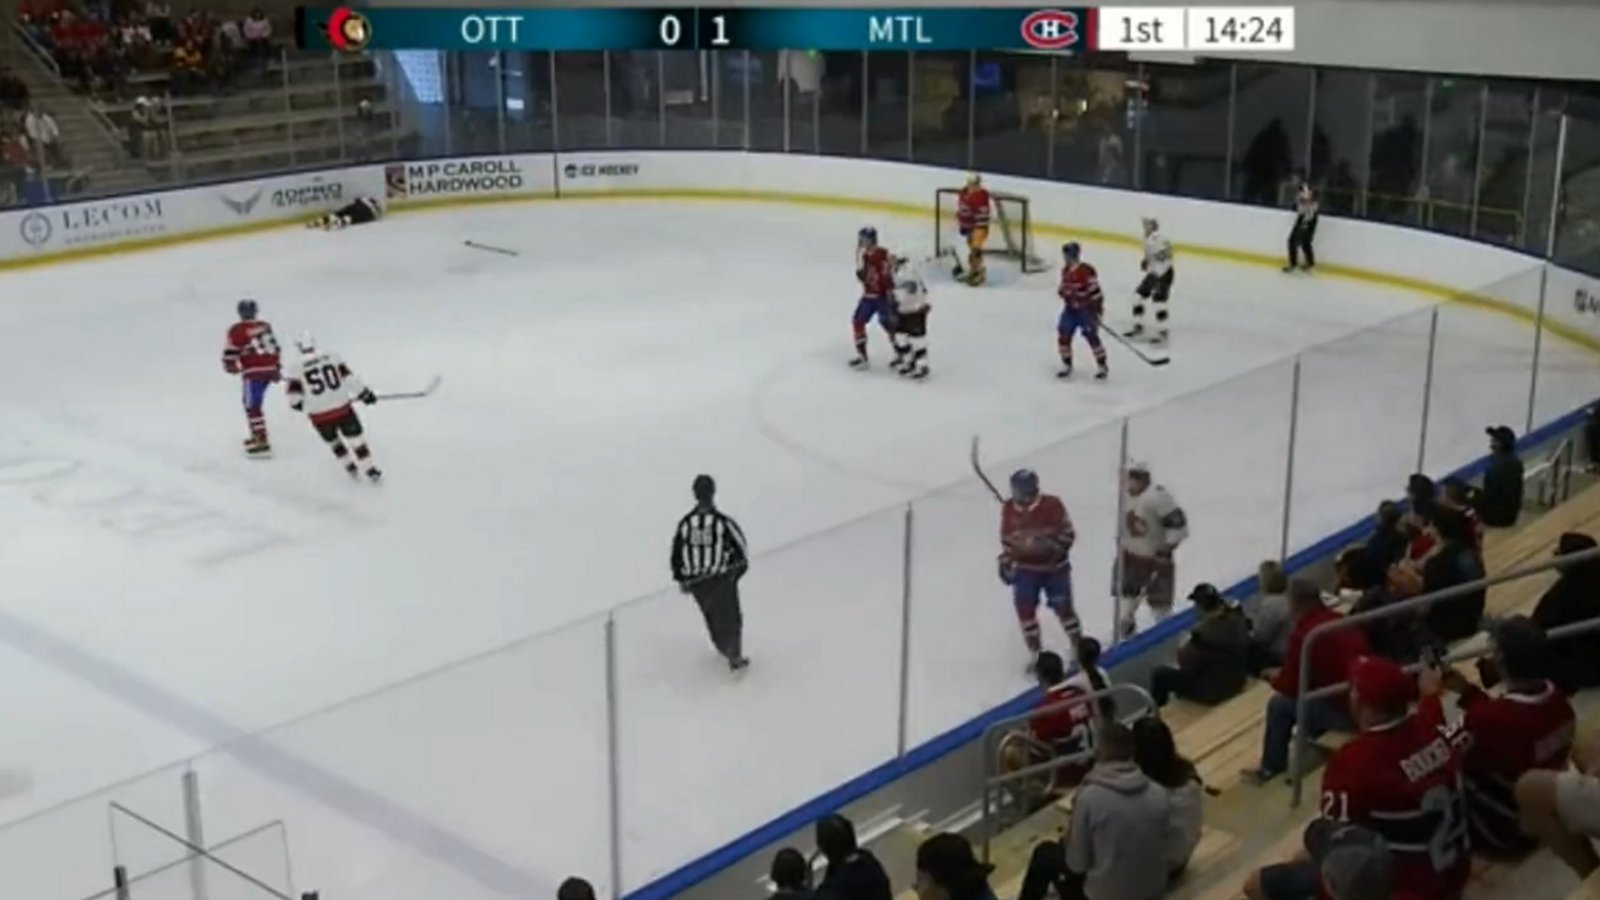 Late hit leads to injury during Habs/Sens prospect game.